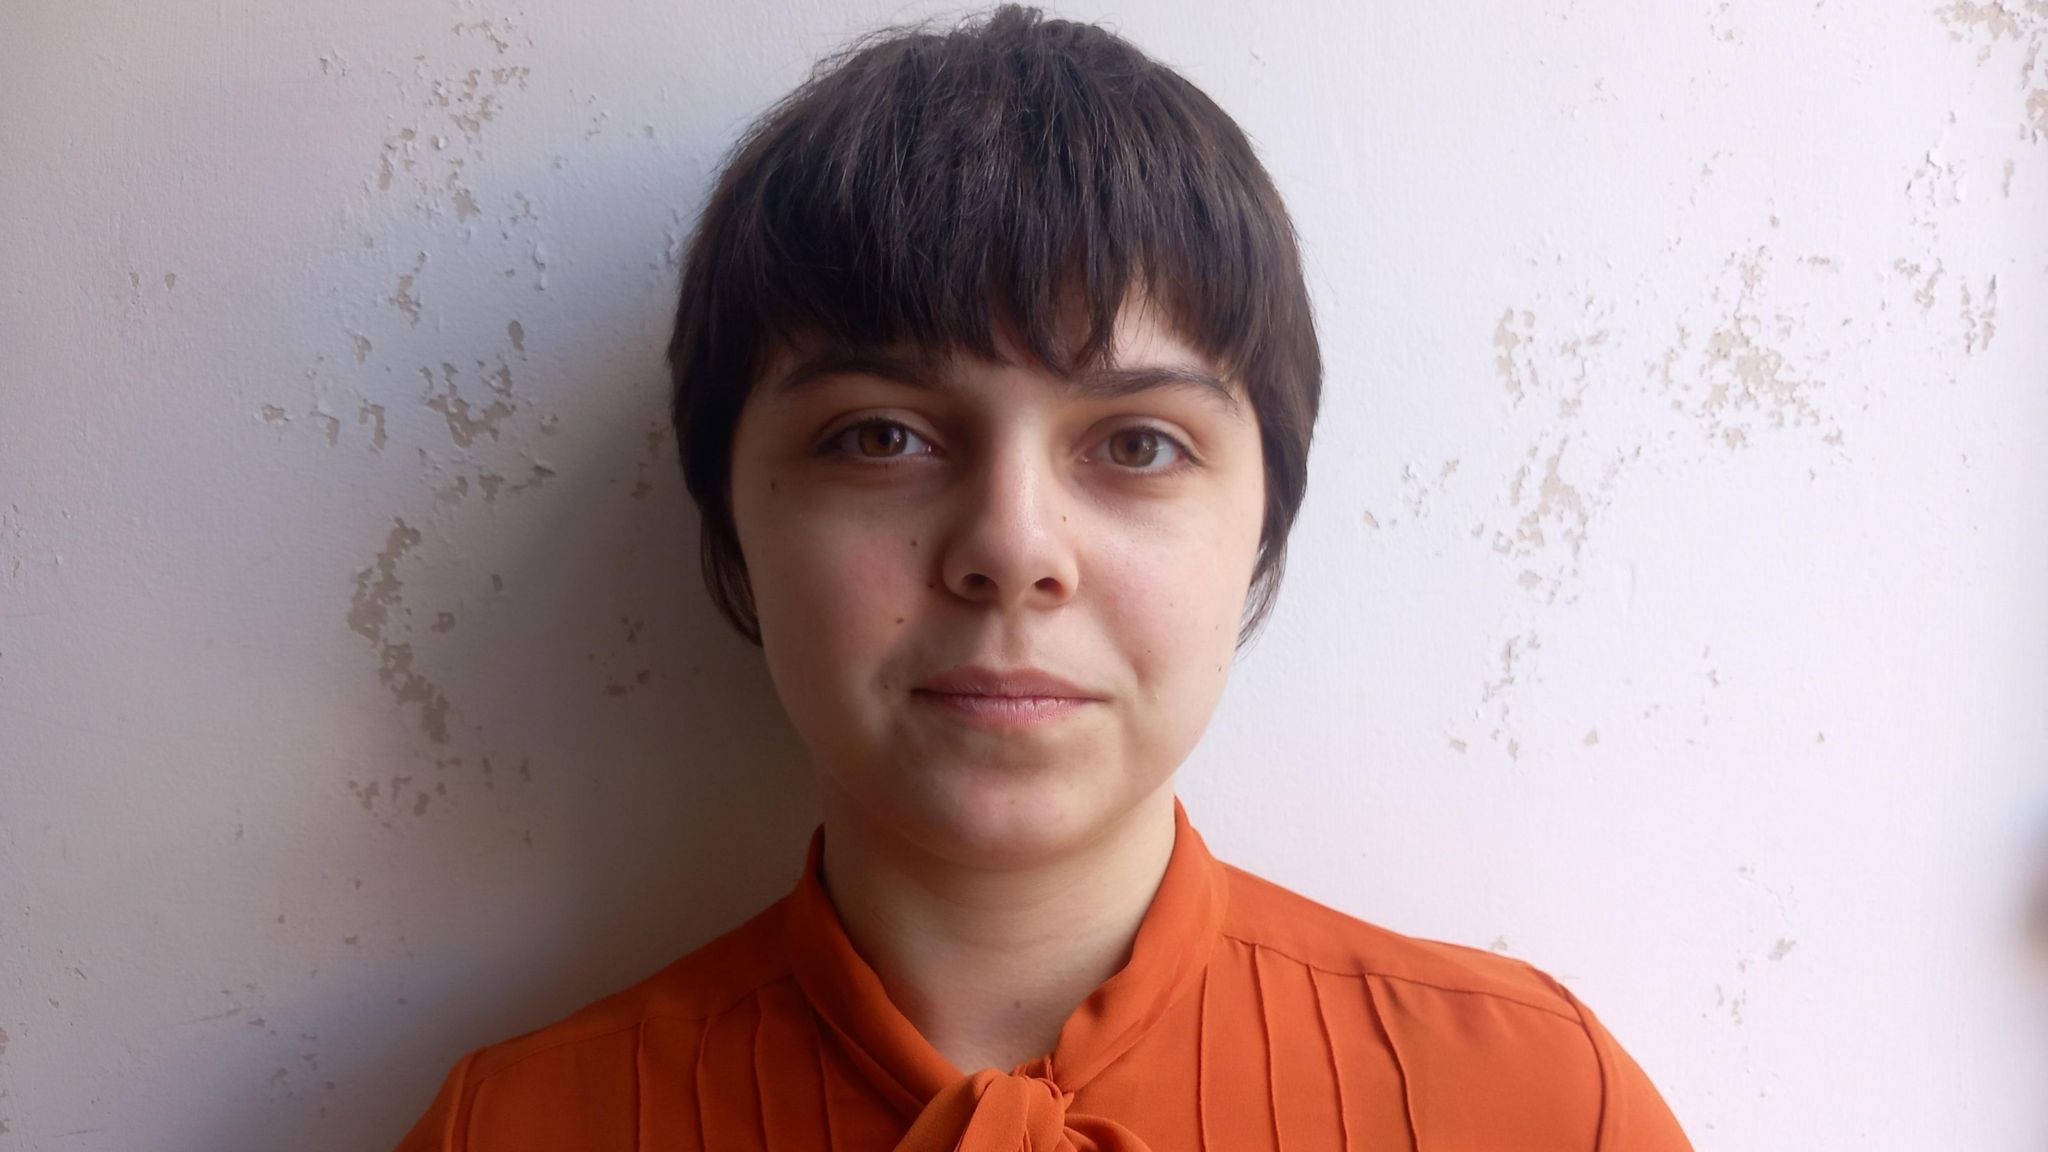 Tallulah Martinez with short hair and wearing an orange top